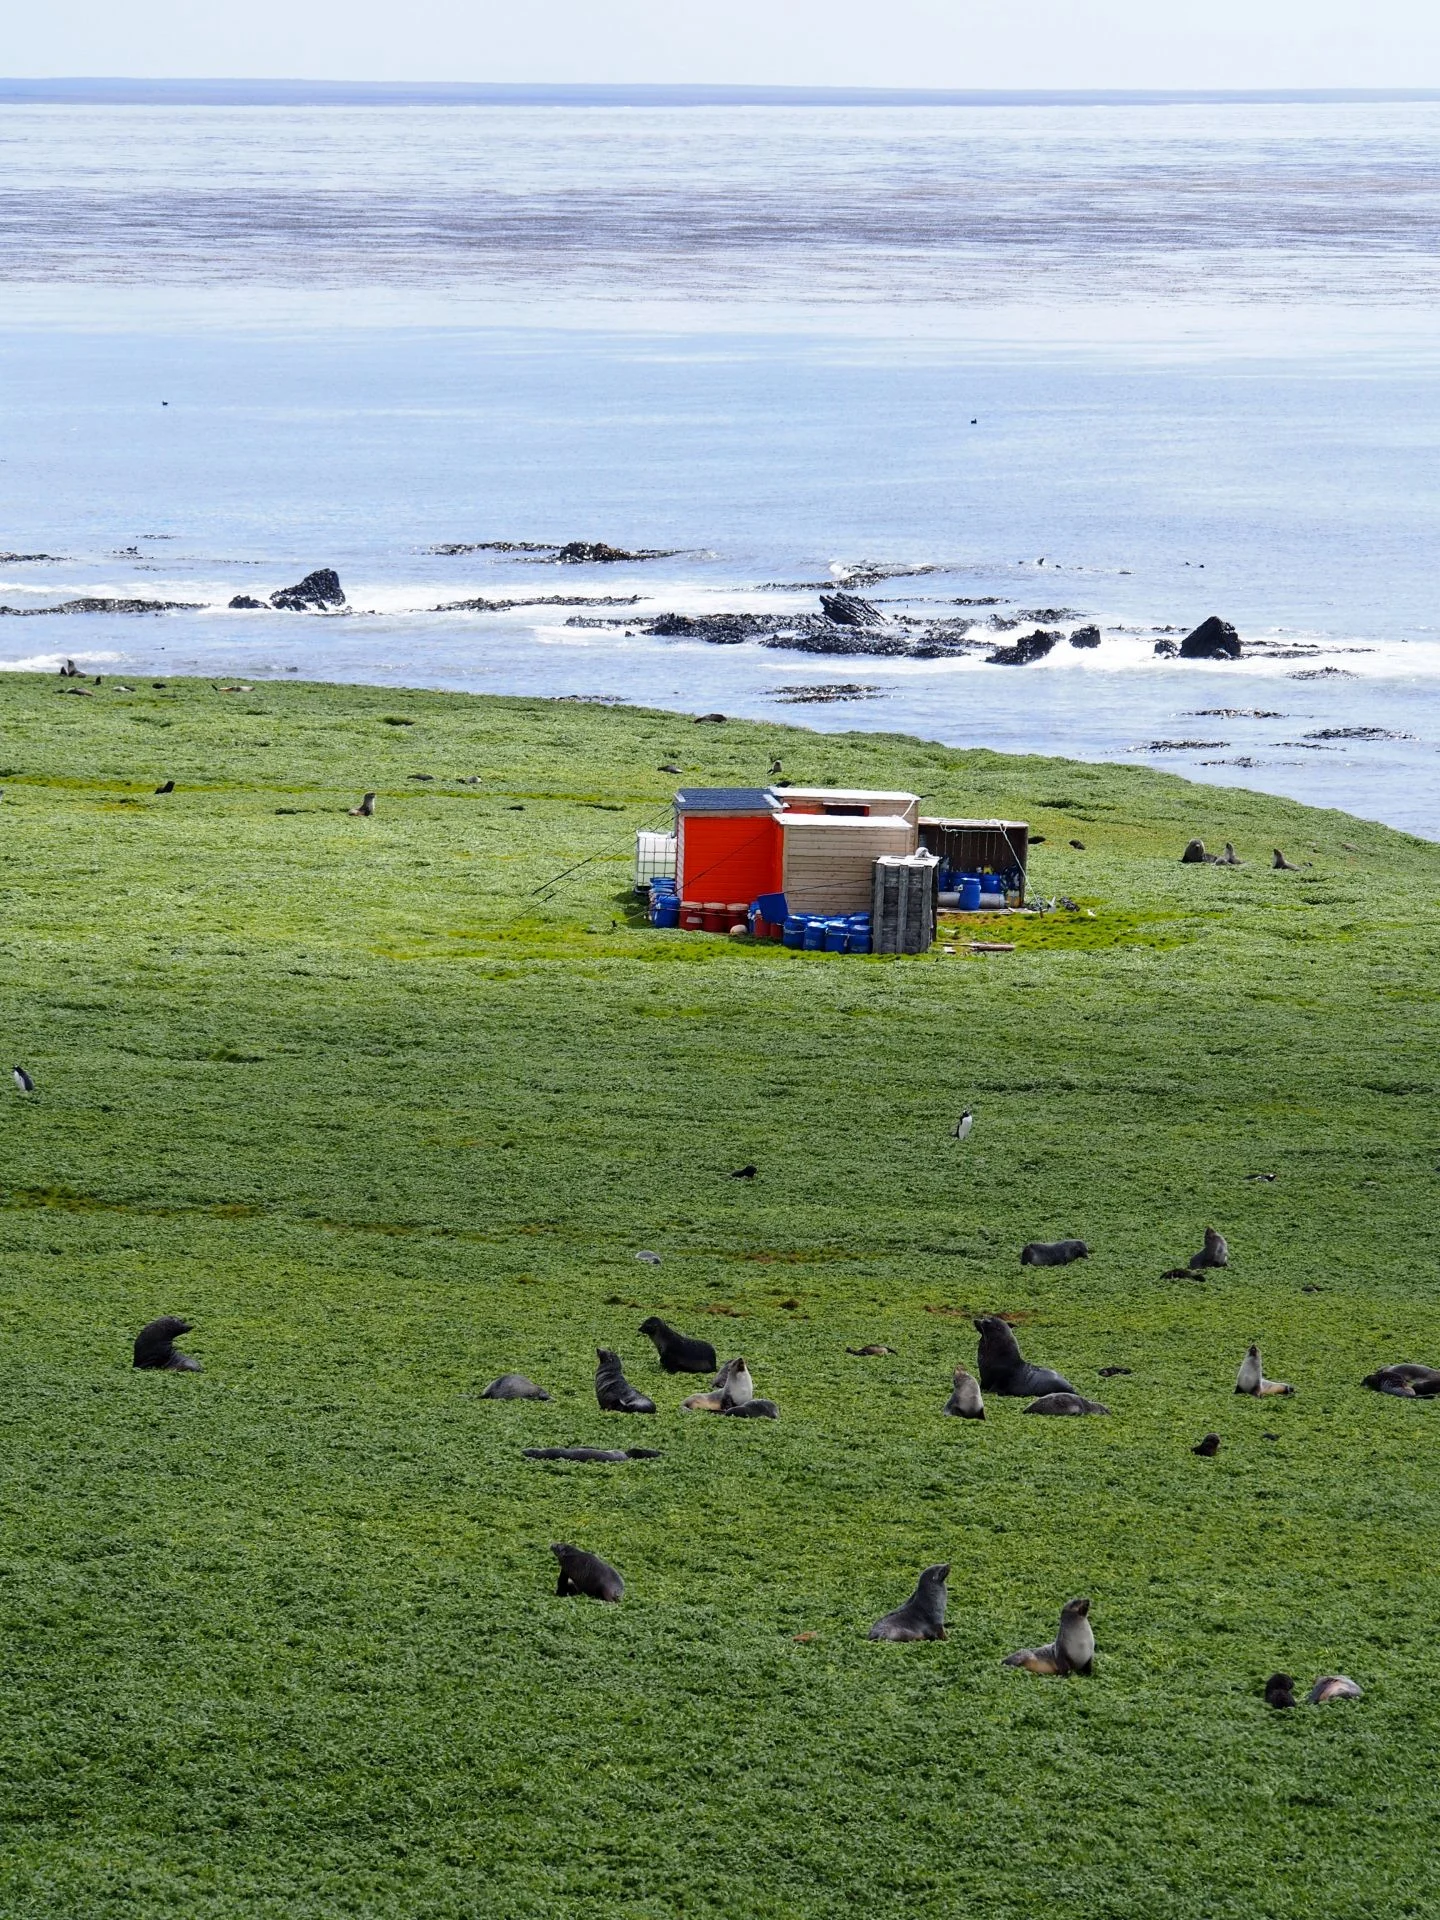 Field hut at Pointe Suzanne on the Desolation Islands with southern elephant seals, gentoos and Antarctic fur seal neighbours. Photo: Mary-Anne Lea